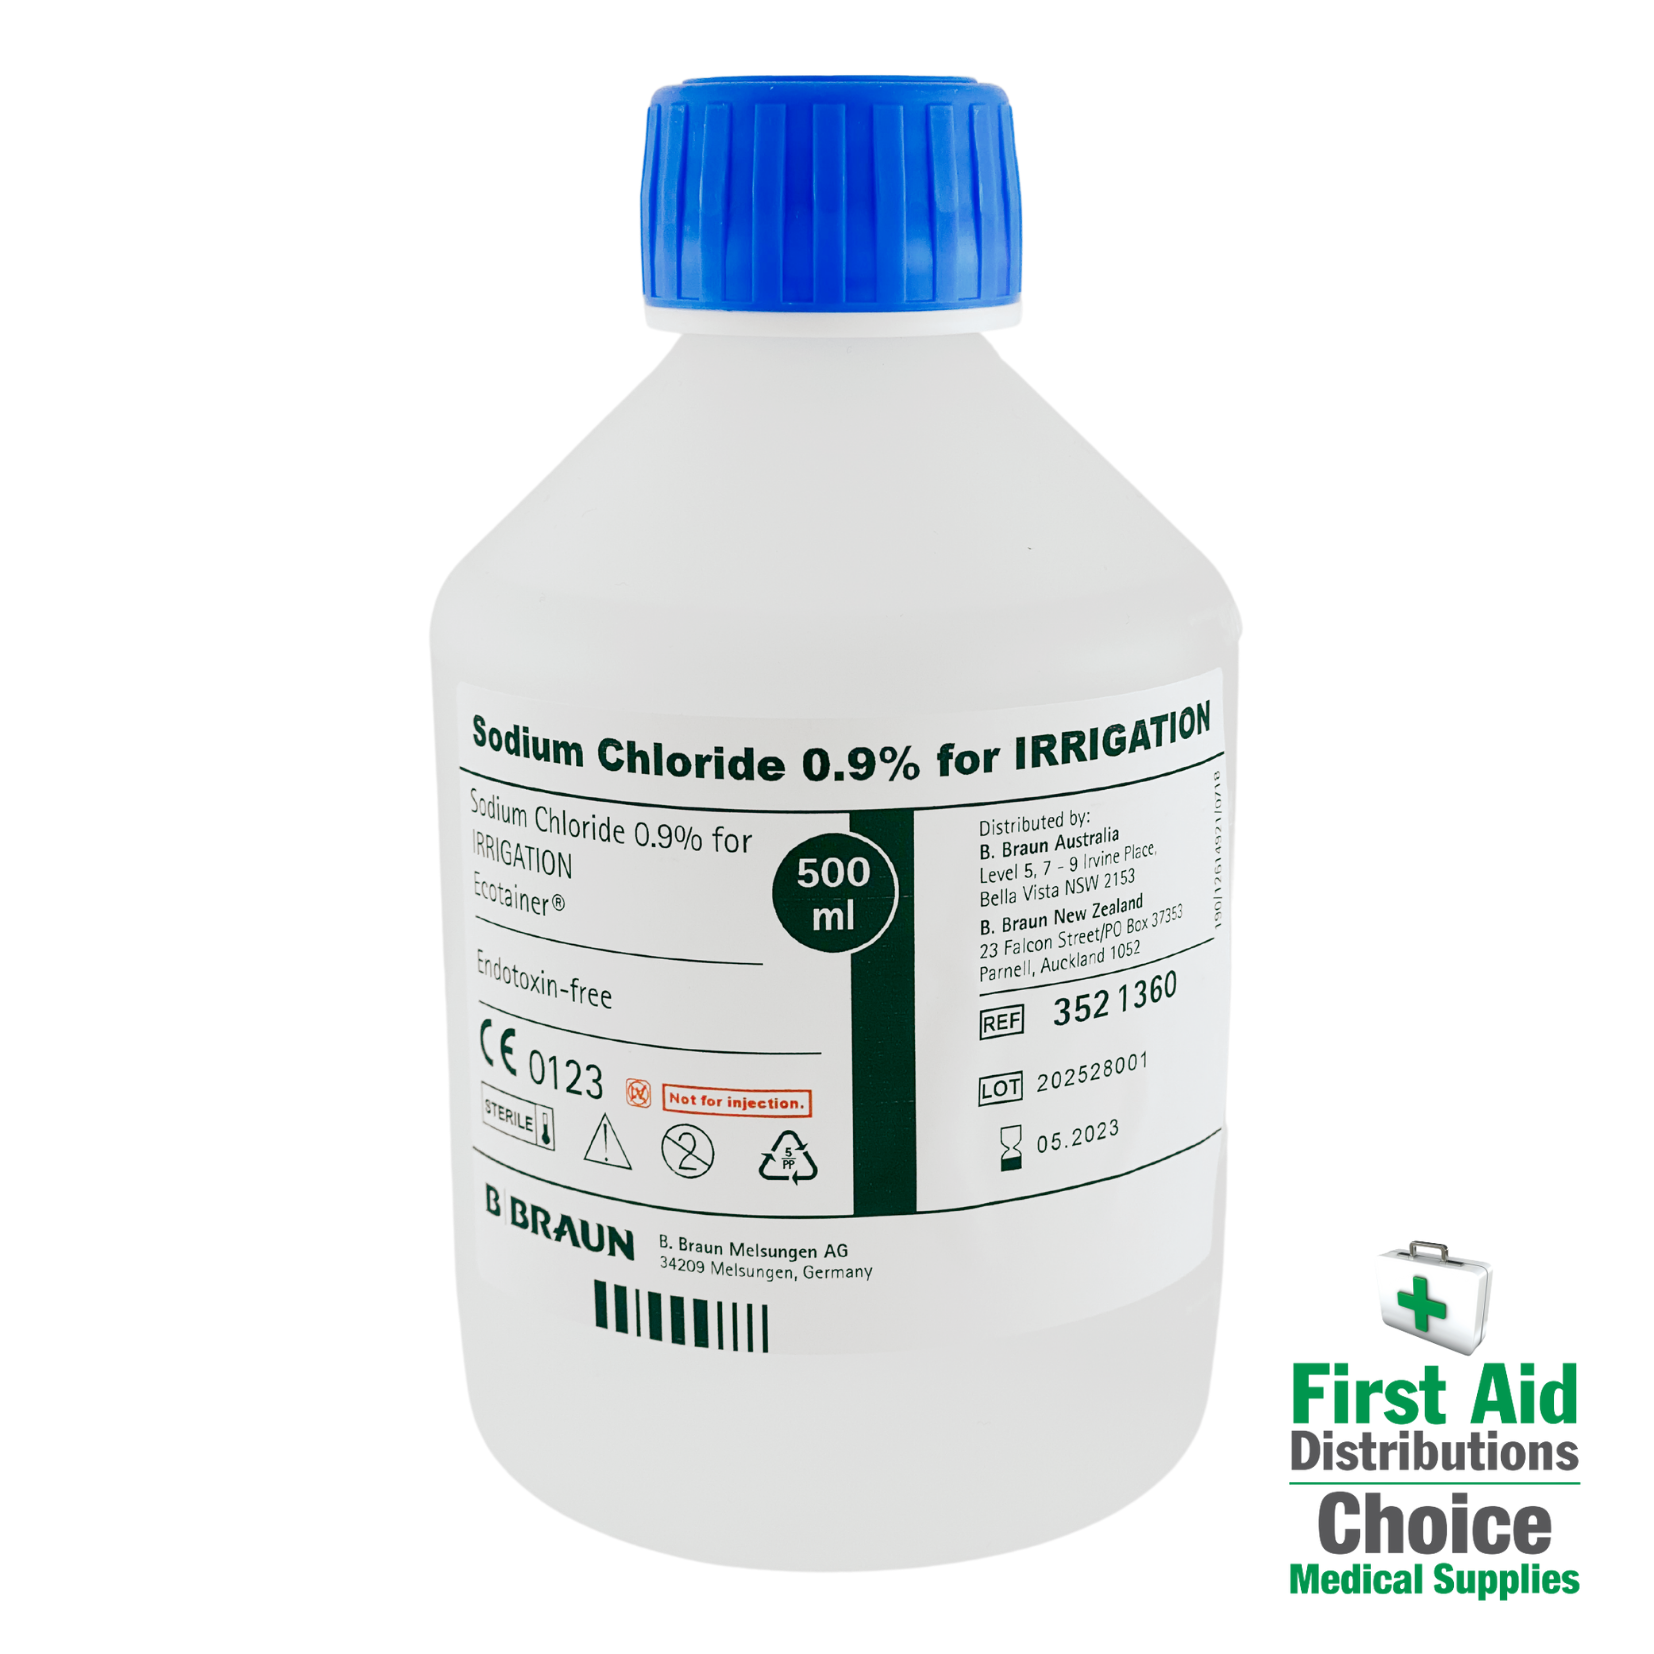 collections/Sodium_Chloride_500ml_Bottle_First_Aid_Distributions.png